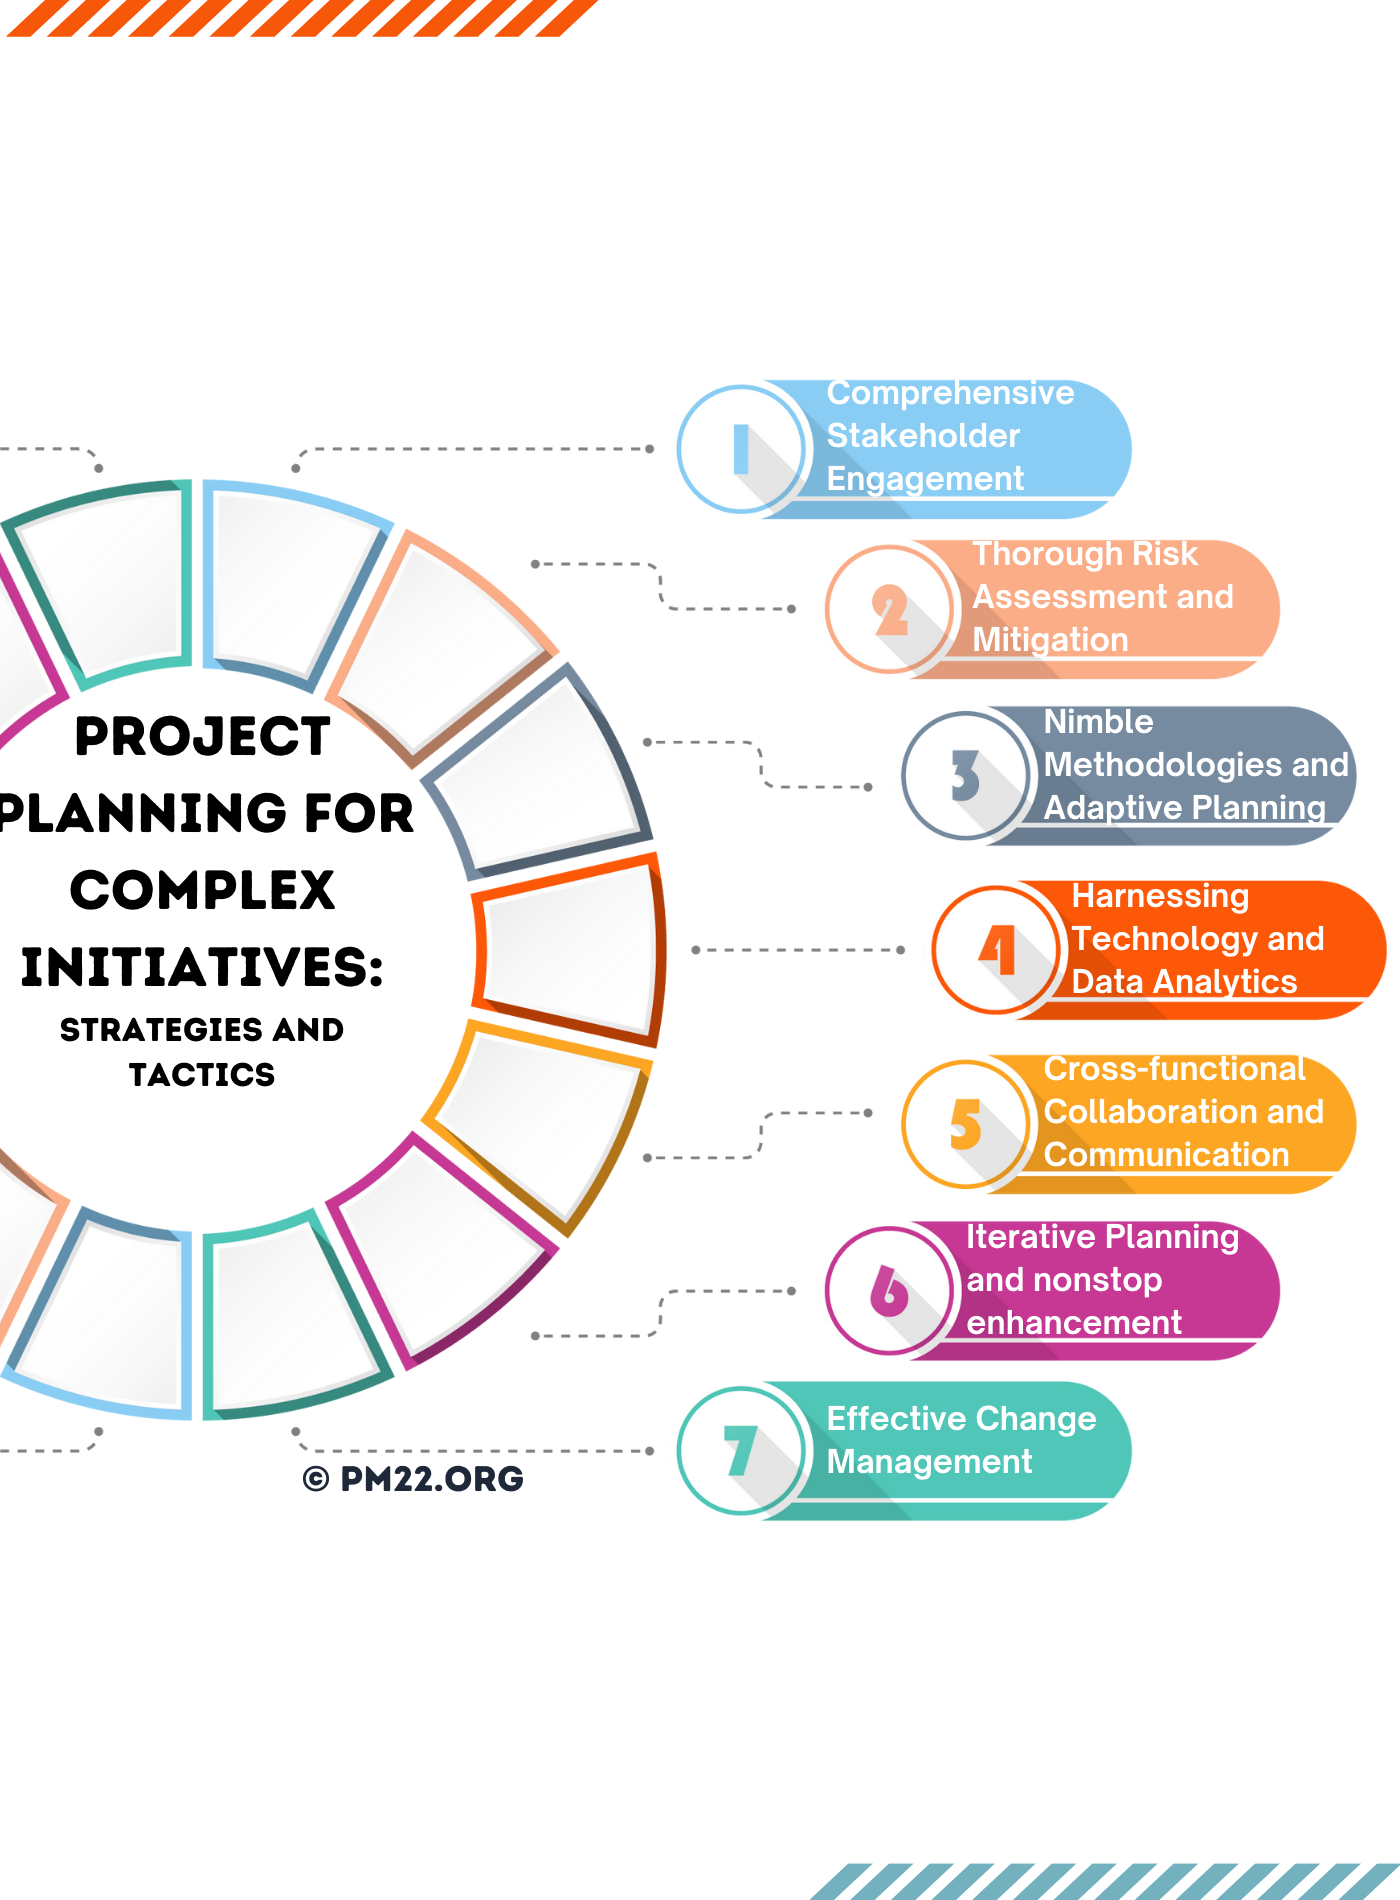 Project Planning for Complex Initiatives: Strategies and Tactics